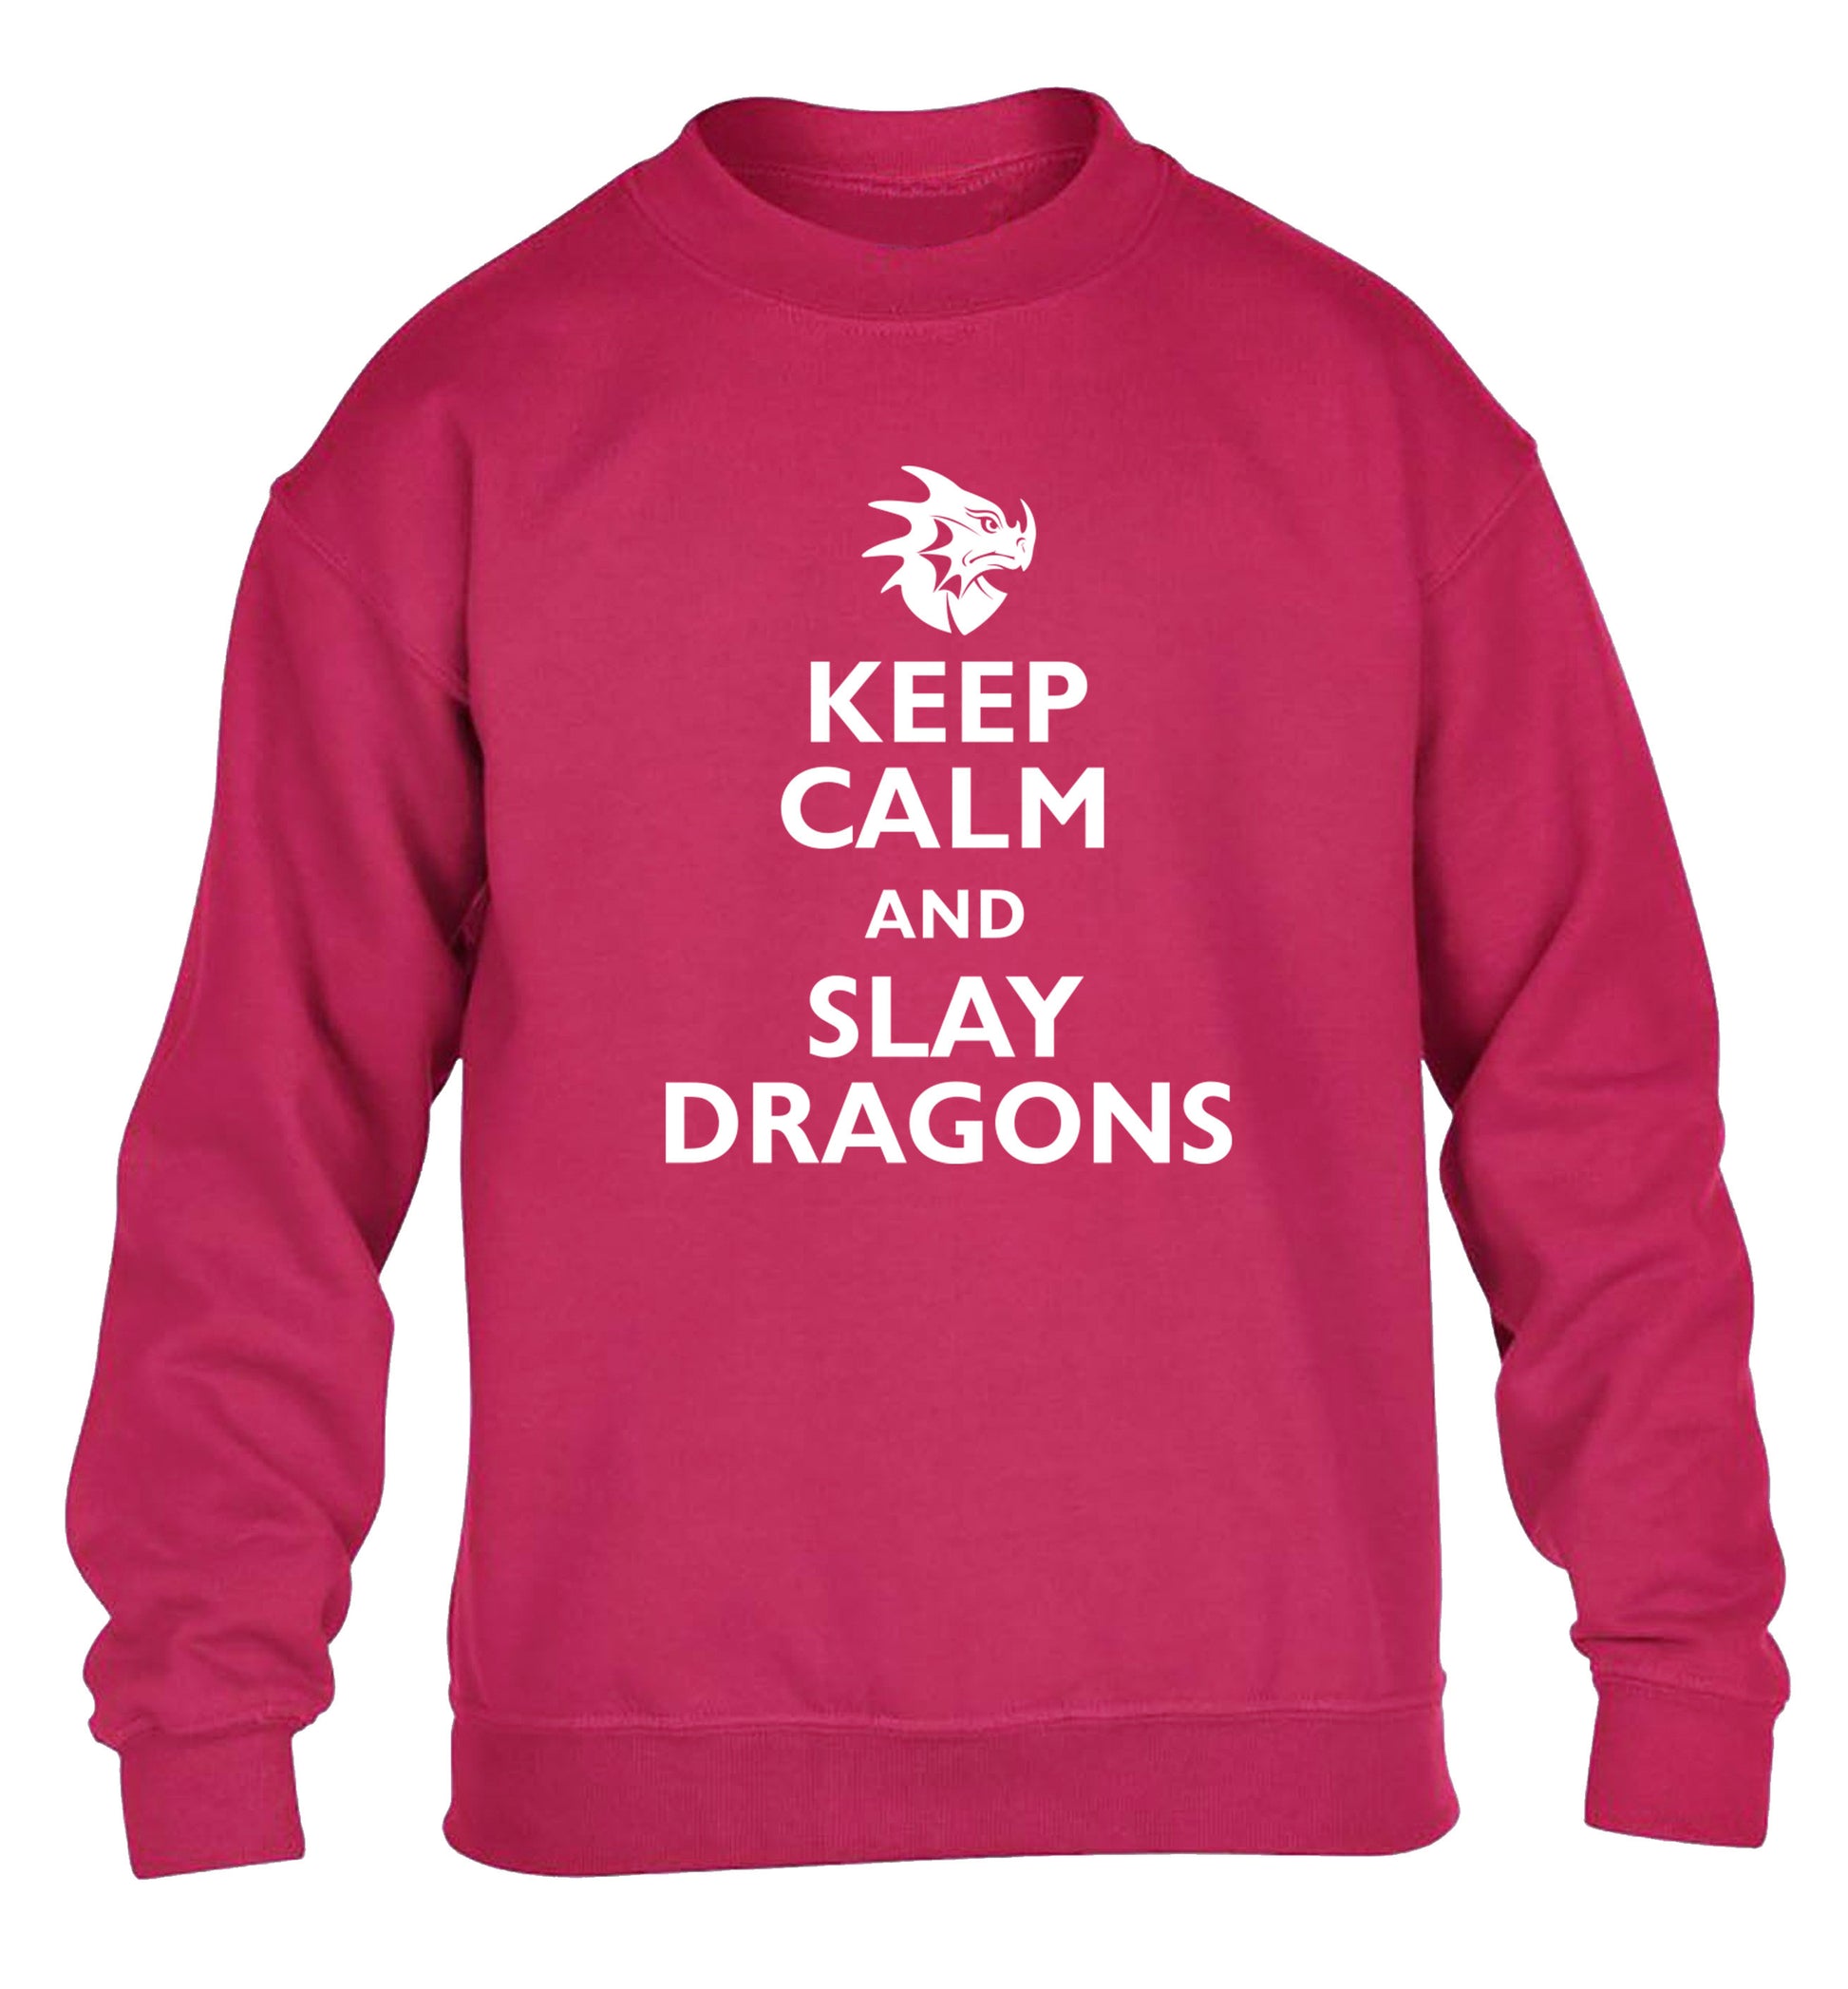 Keep calm and slay dragons children's pink sweater 12-14 Years